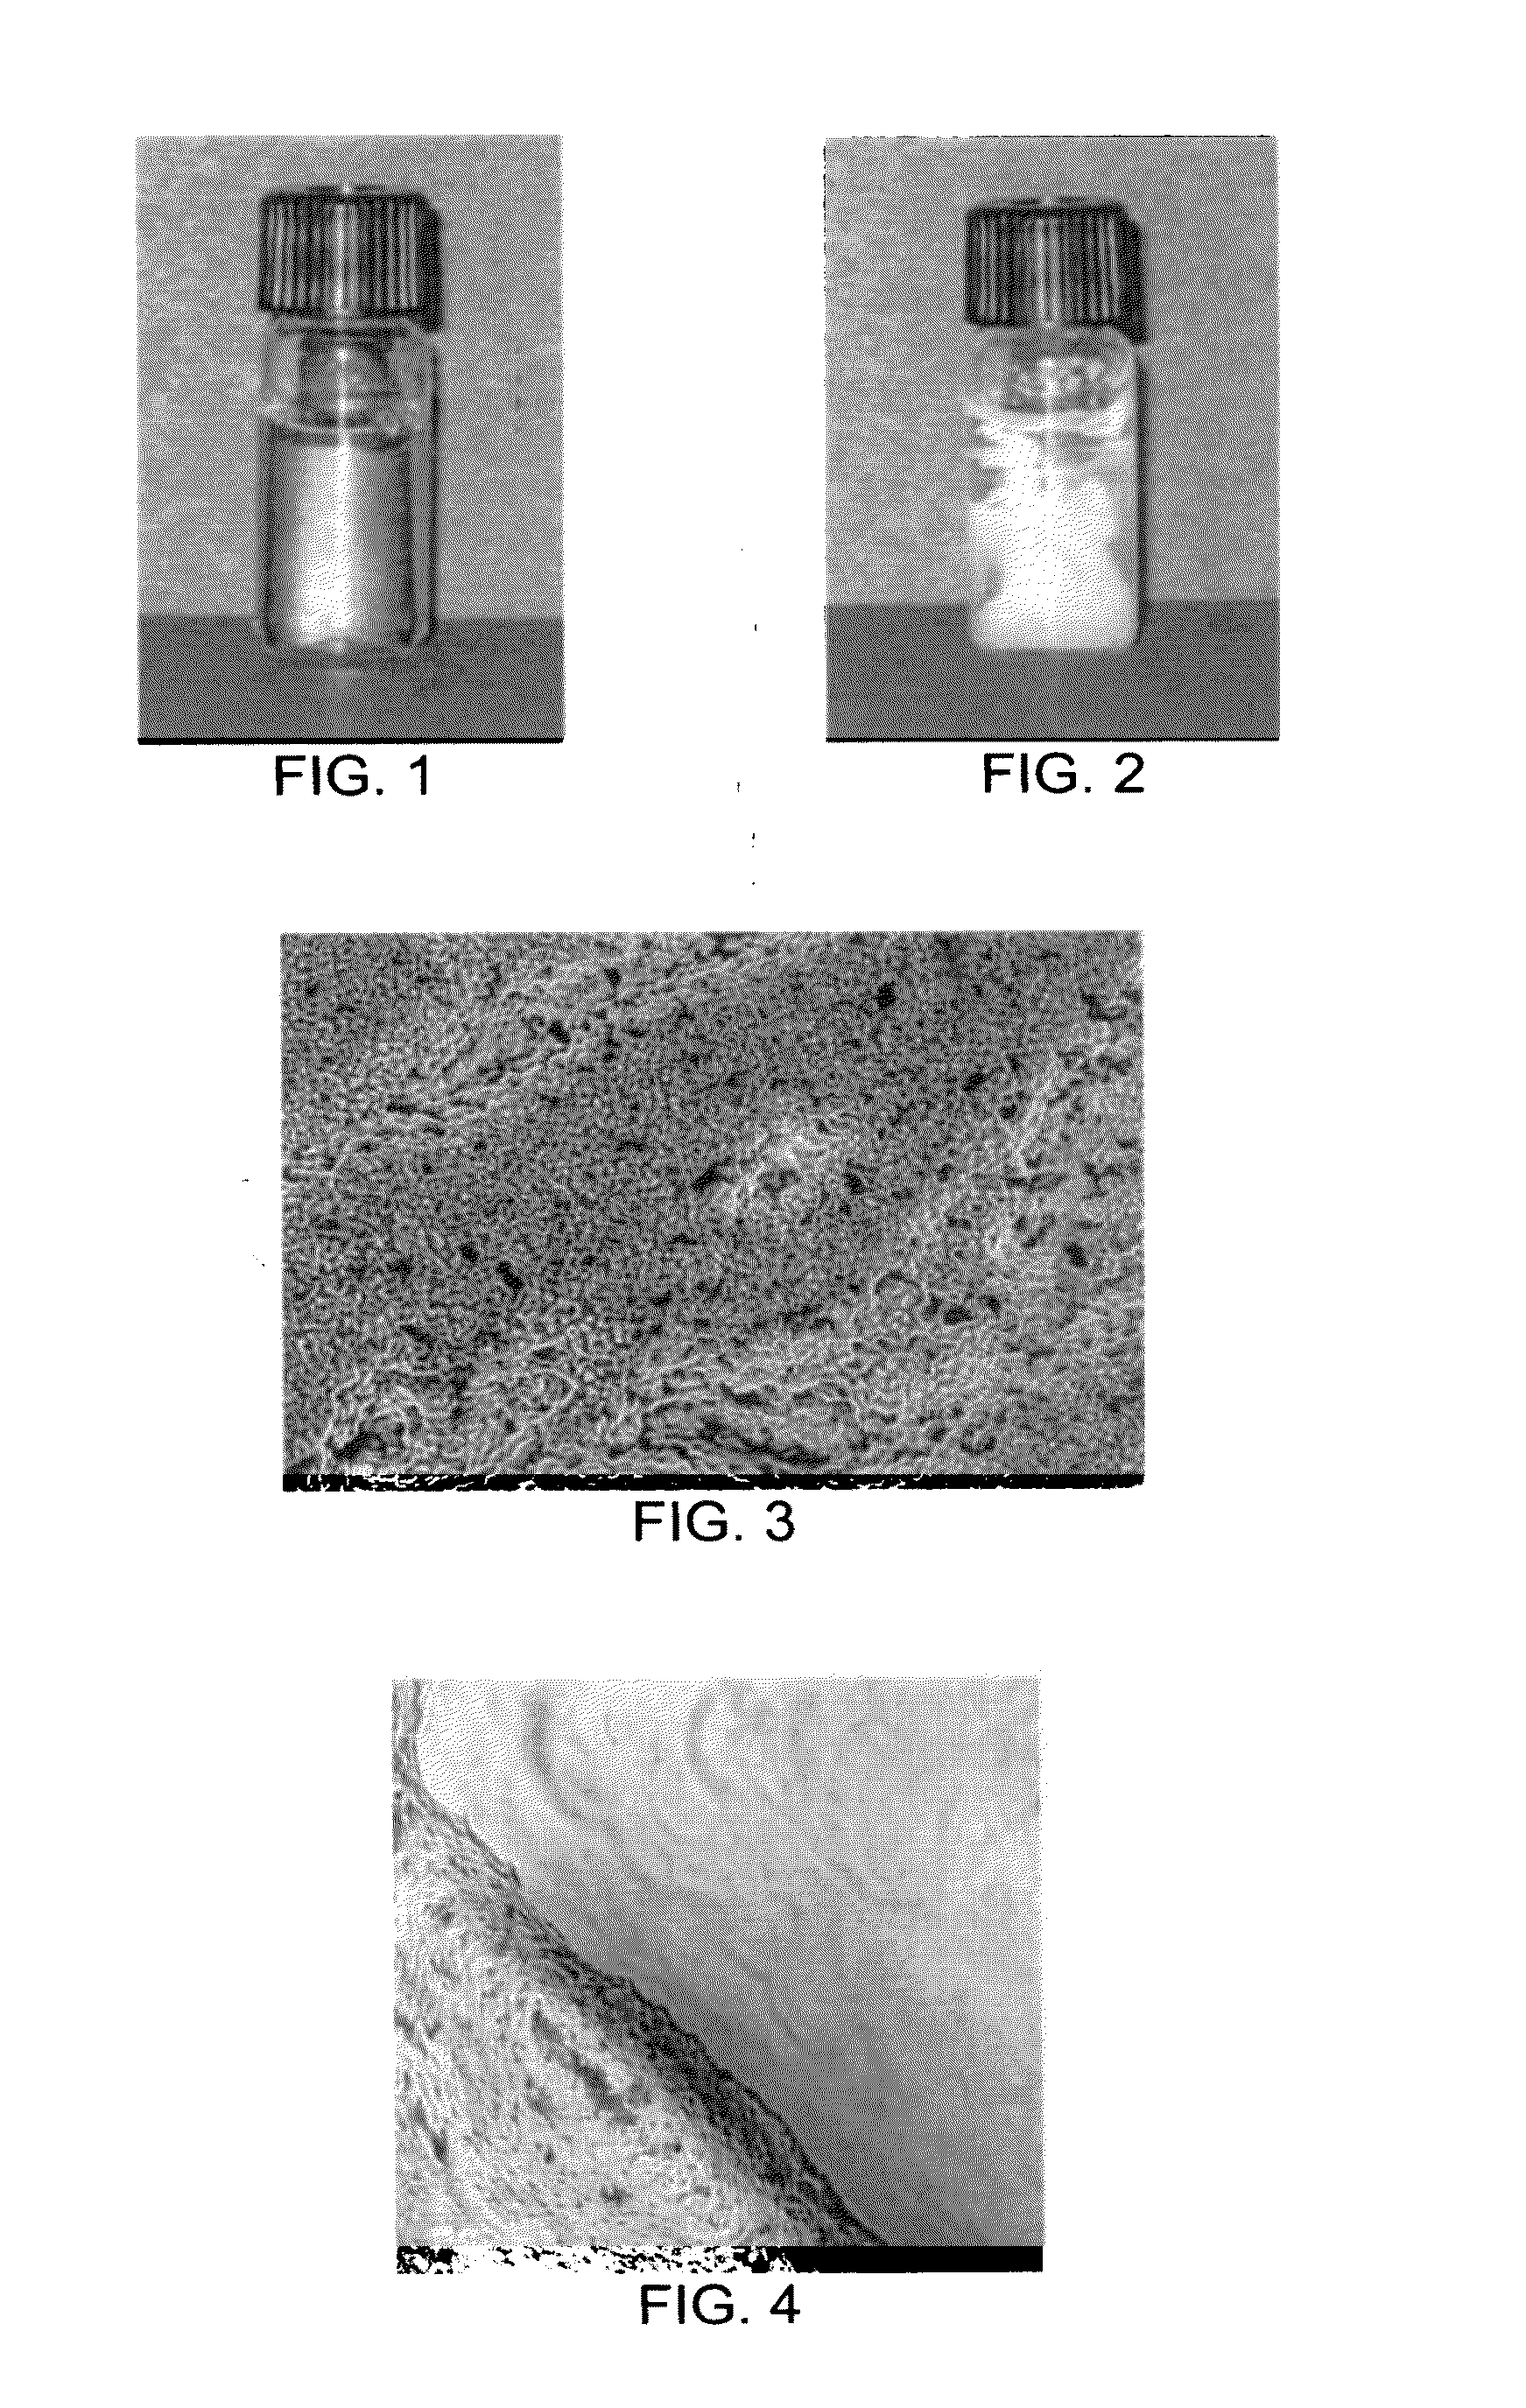 Thermo-responsive hydrogel compositions